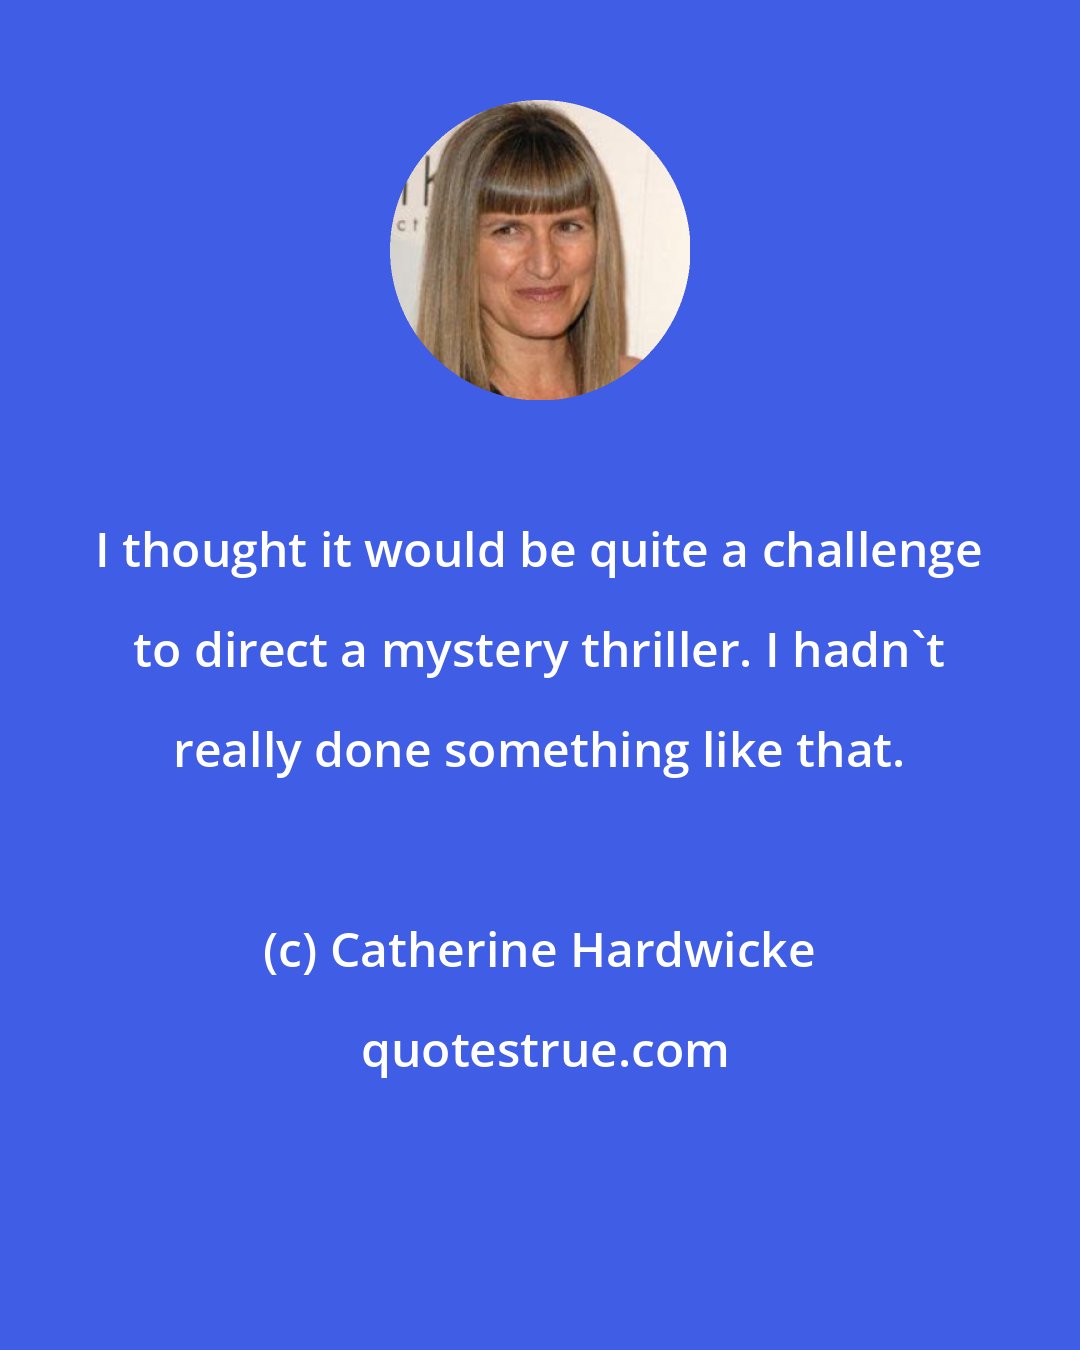 Catherine Hardwicke: I thought it would be quite a challenge to direct a mystery thriller. I hadn't really done something like that.